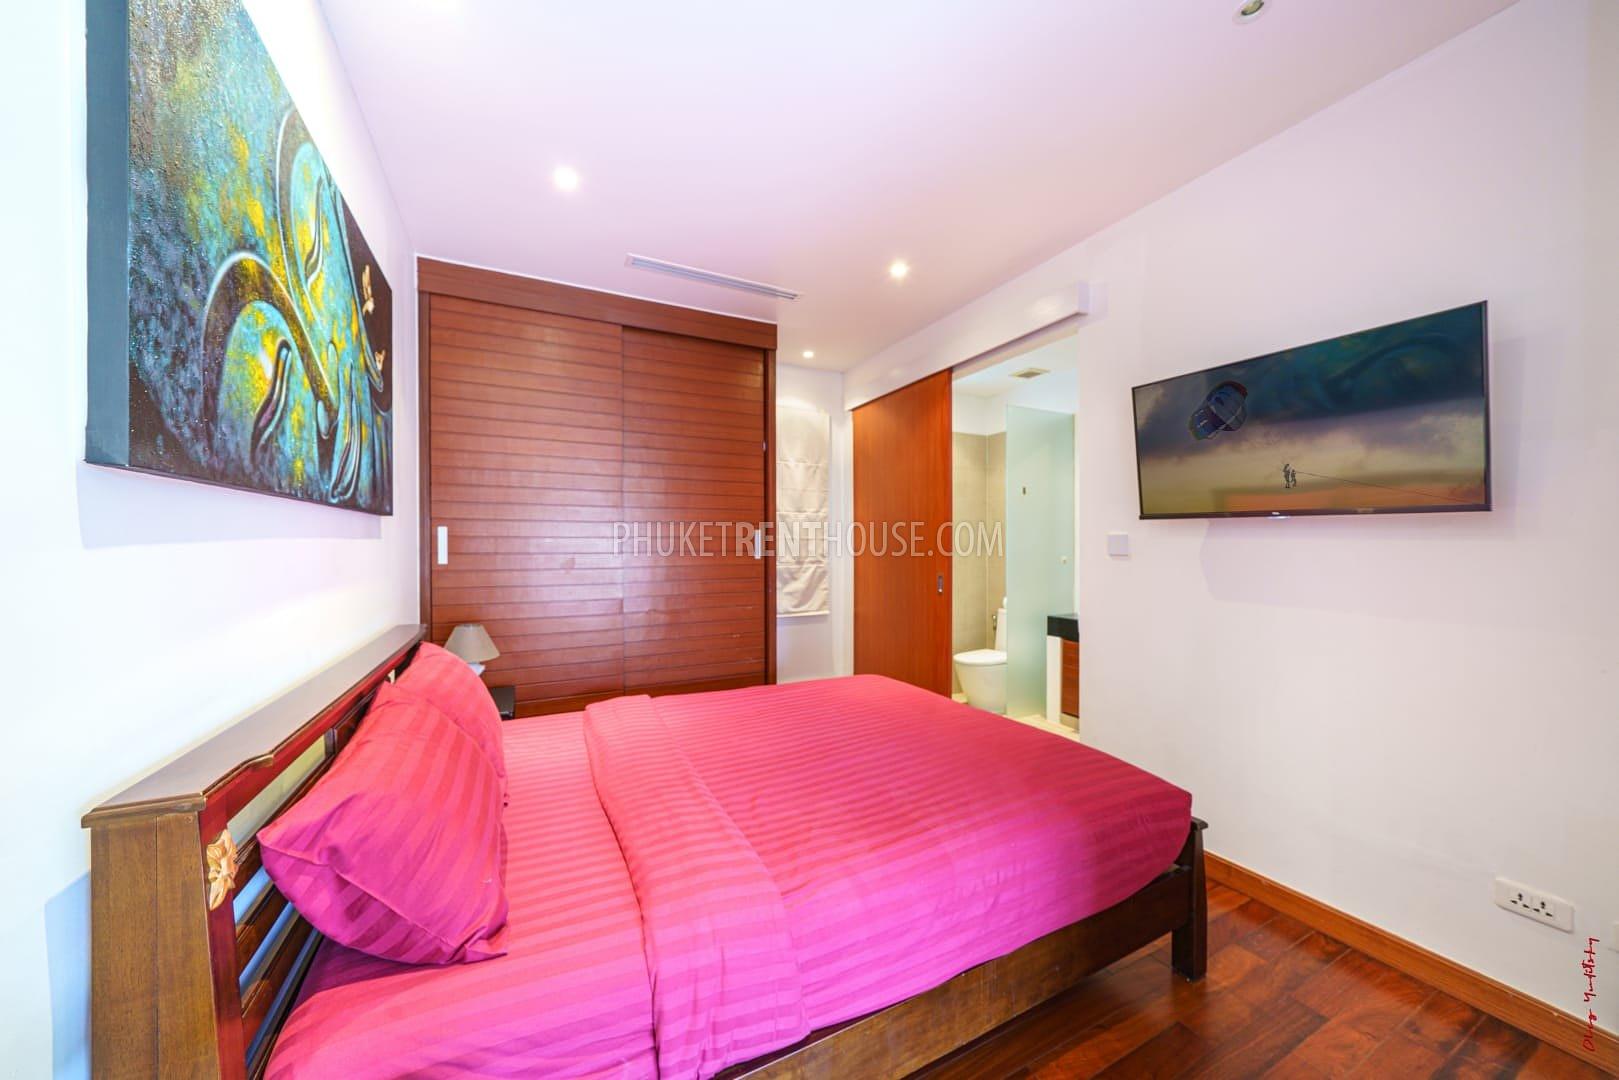 BAN21764: One bedroom villa with private pool on Bangtao beach. Photo #16